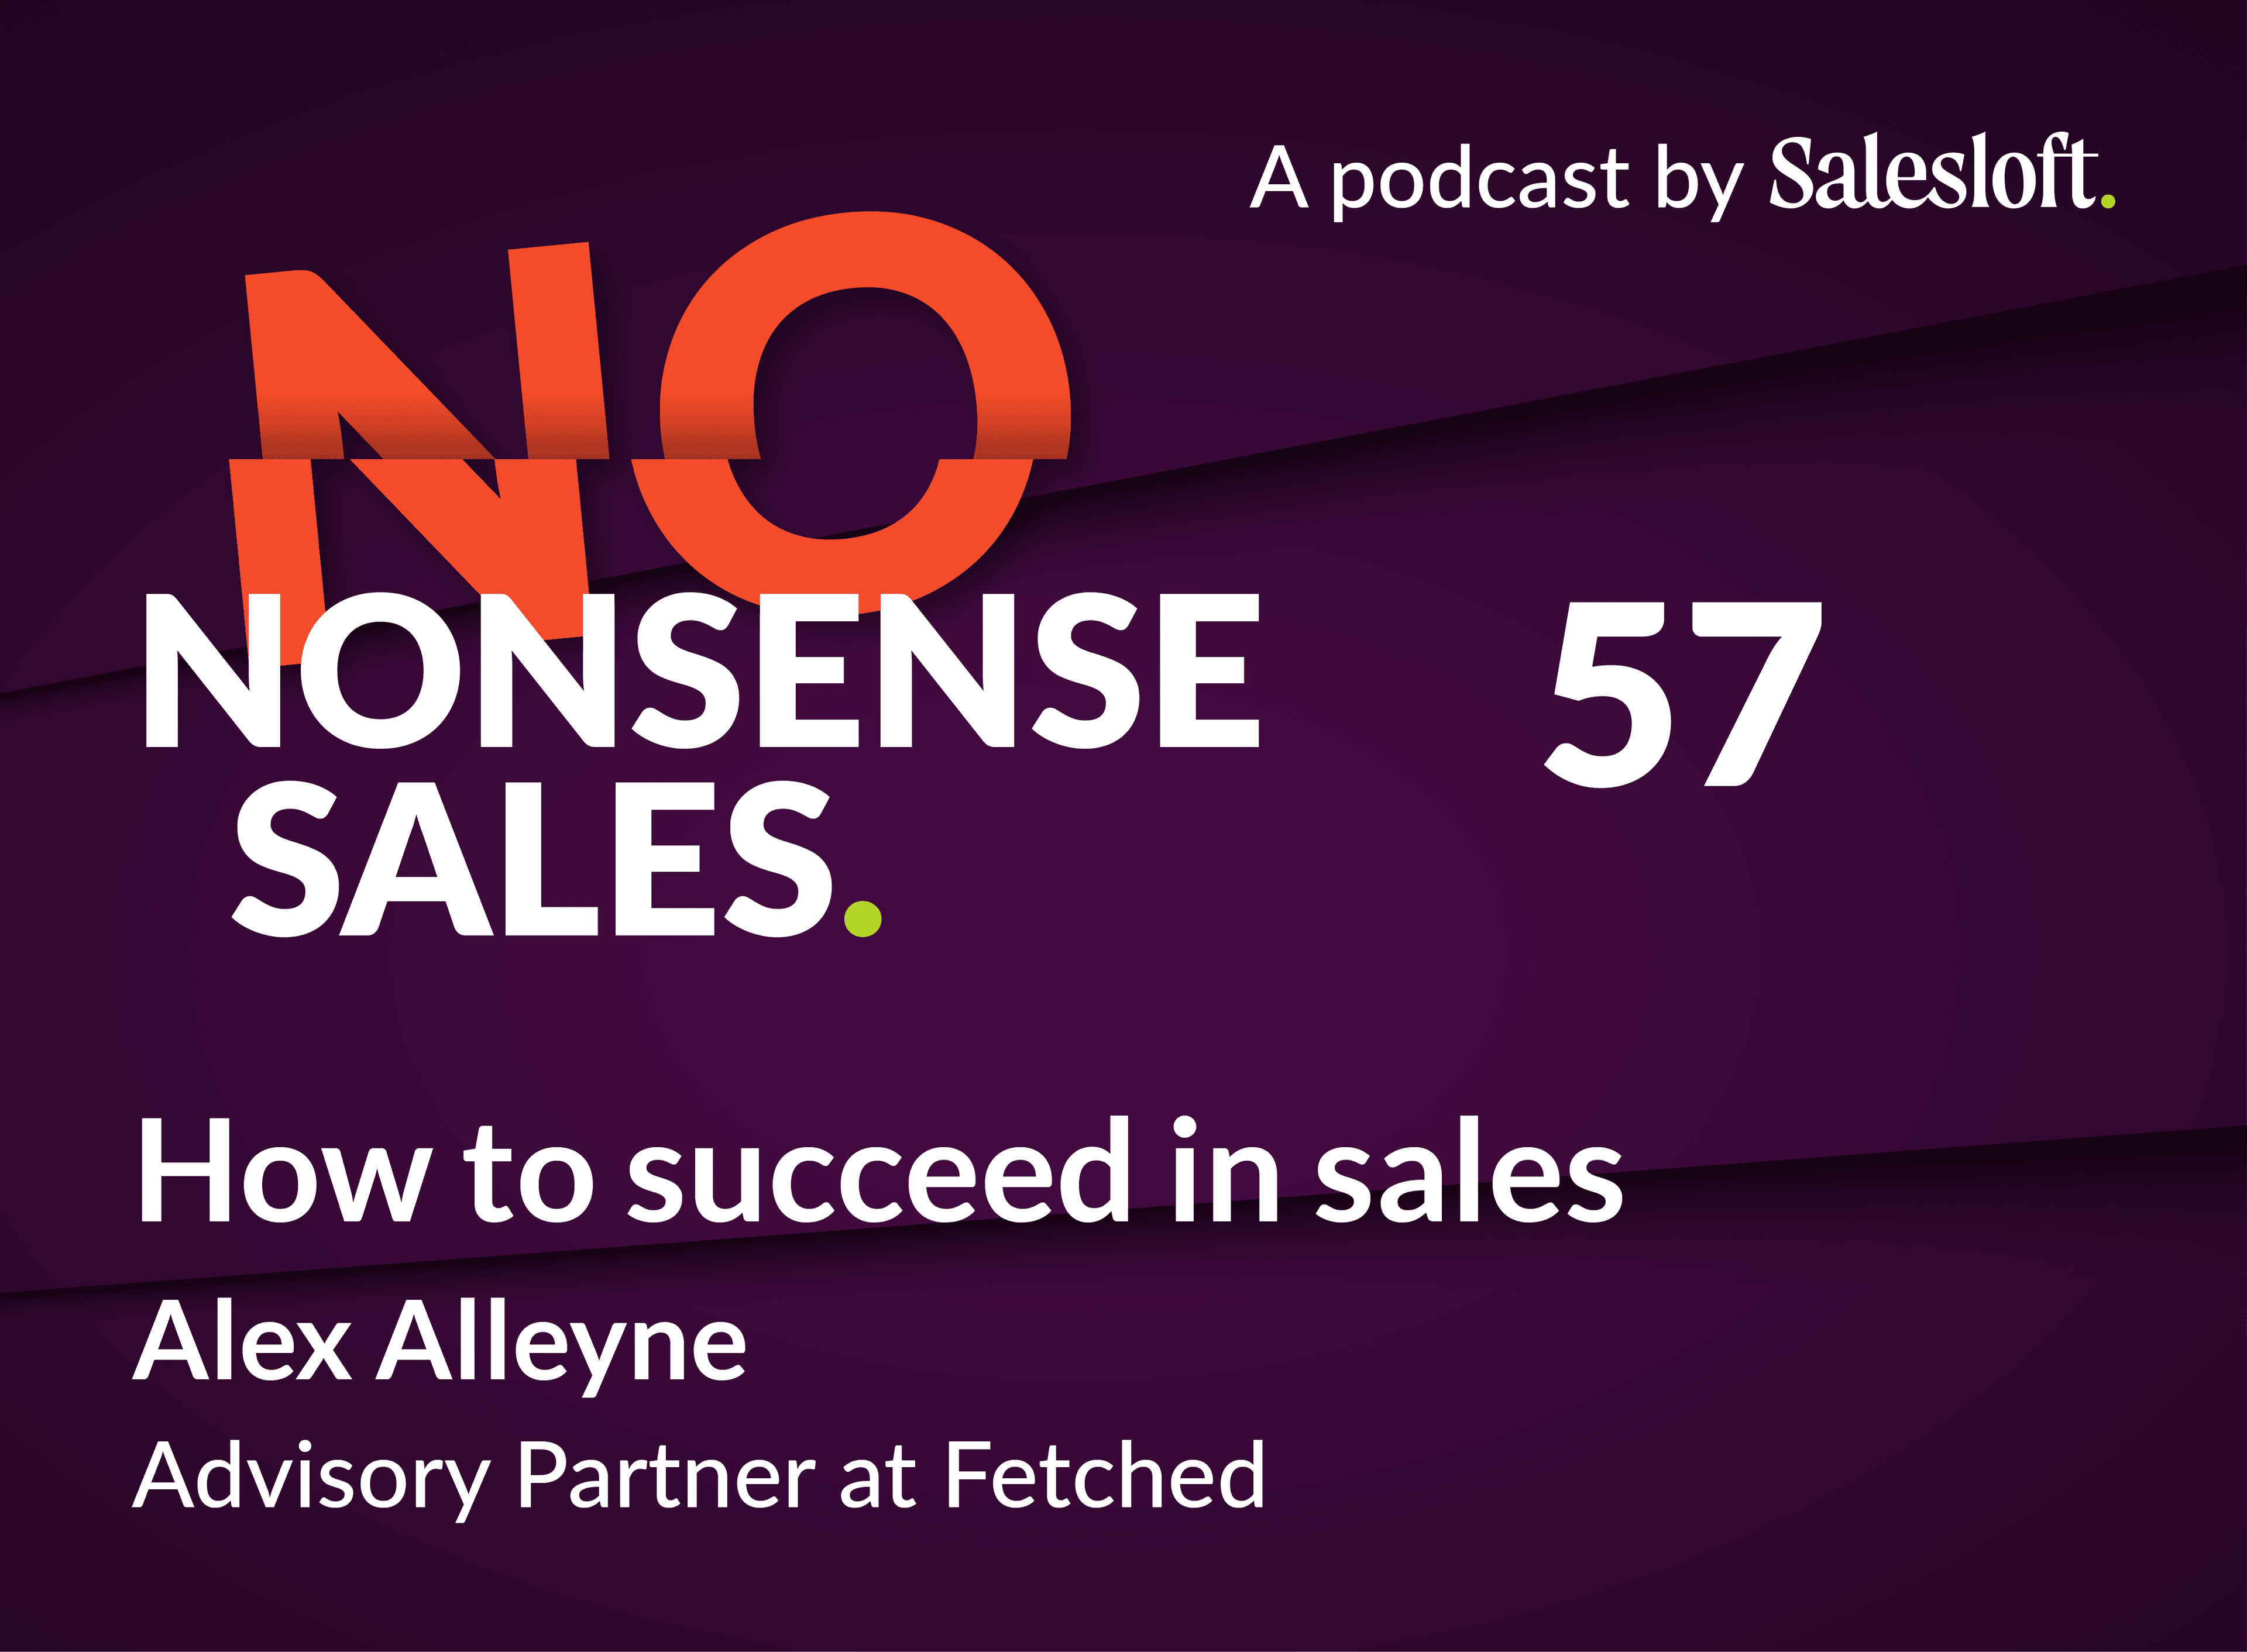 "How to succeed in sales"